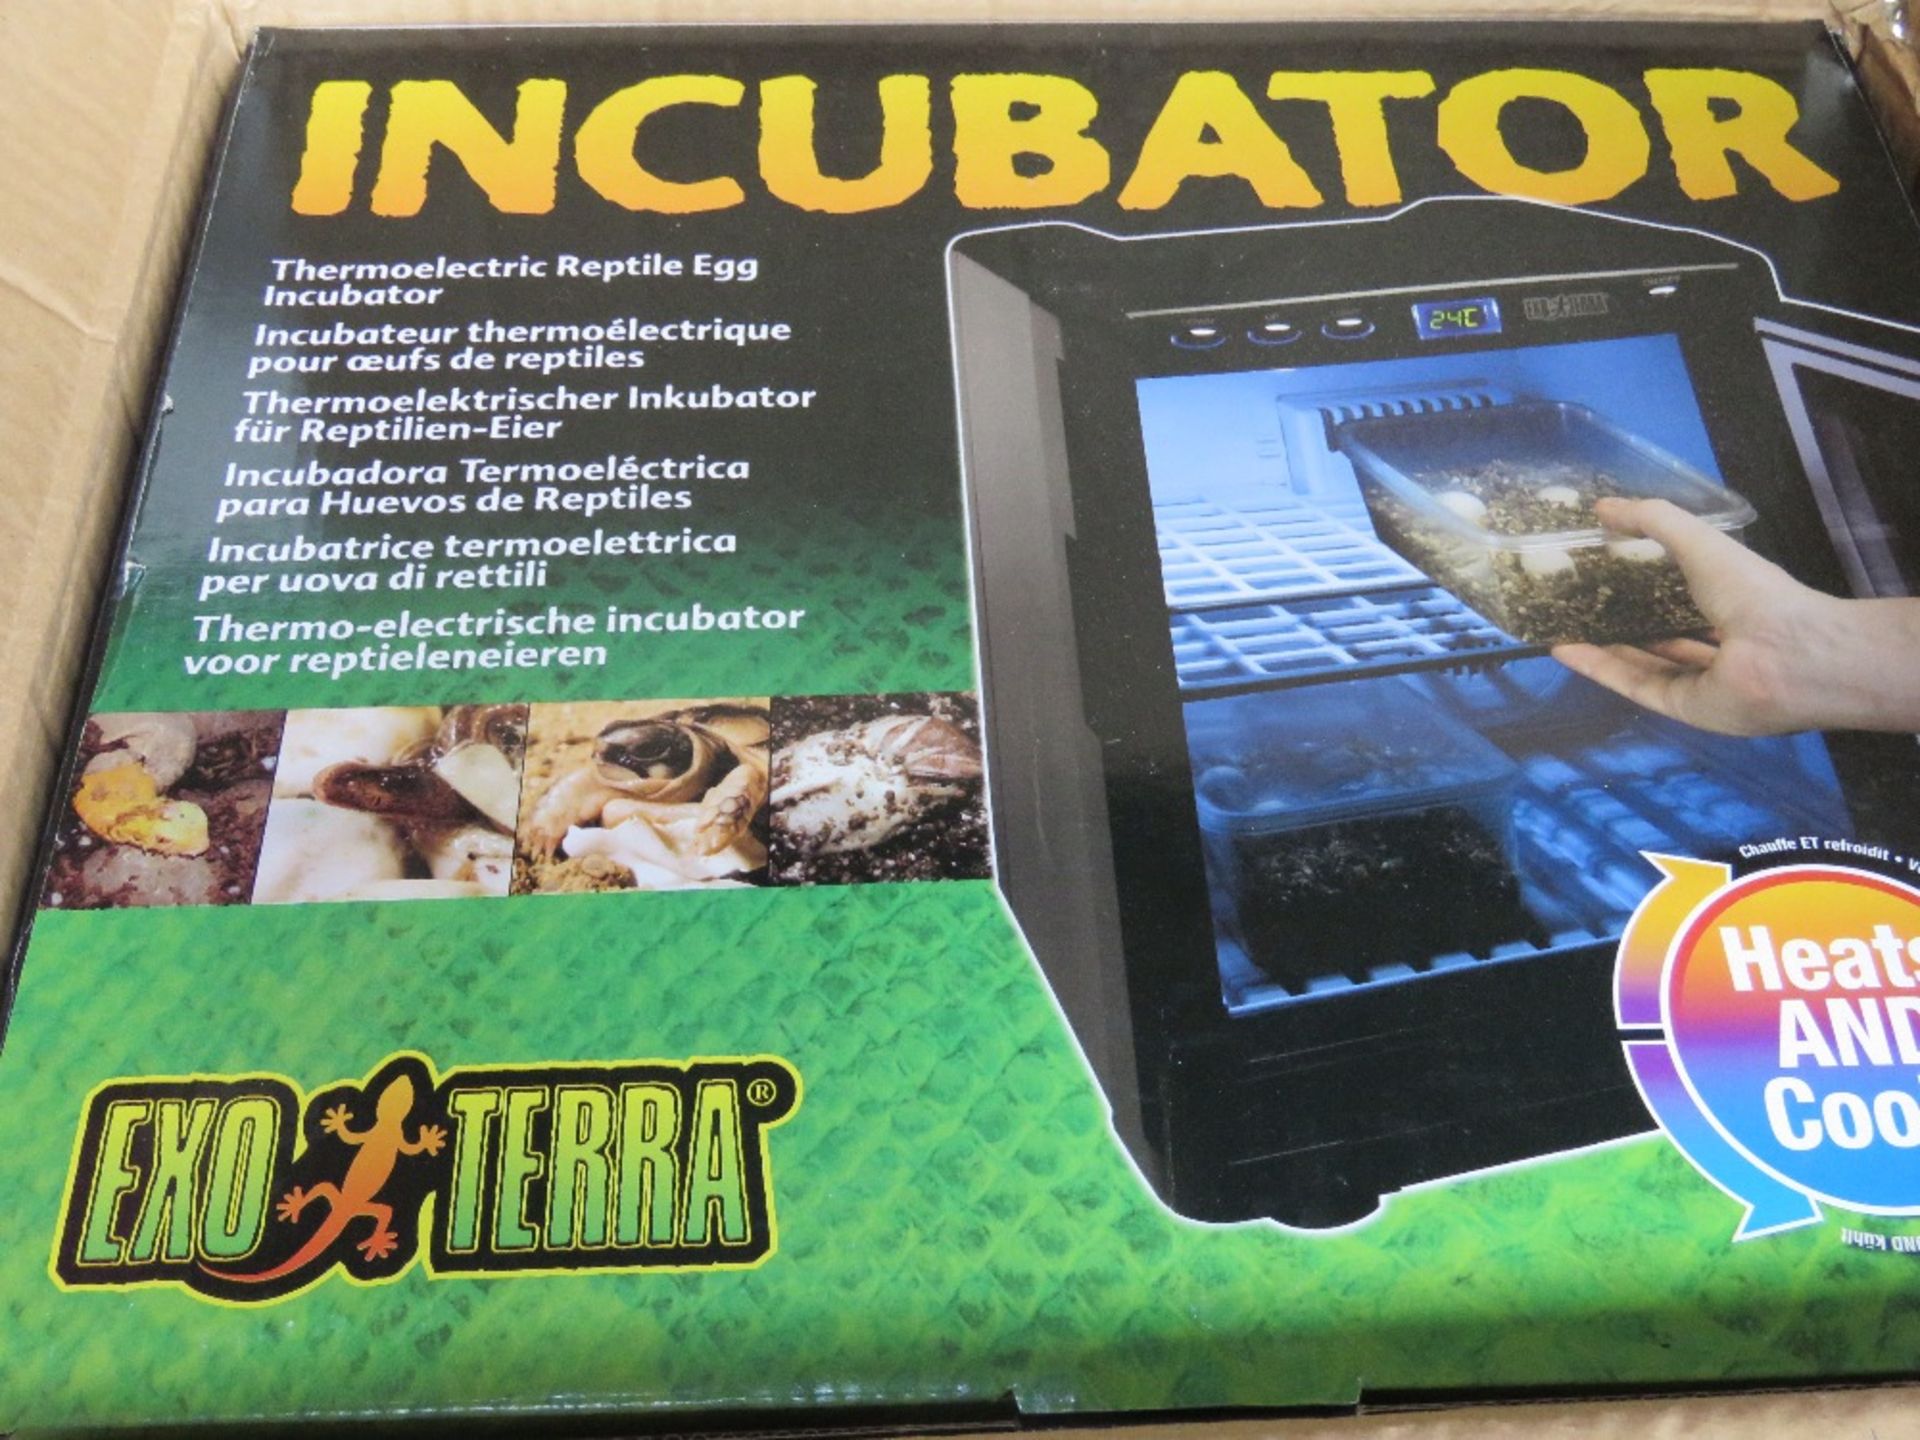 An Exoterra thermoelectric reptile egg incubation, as new in box. - Image 2 of 2